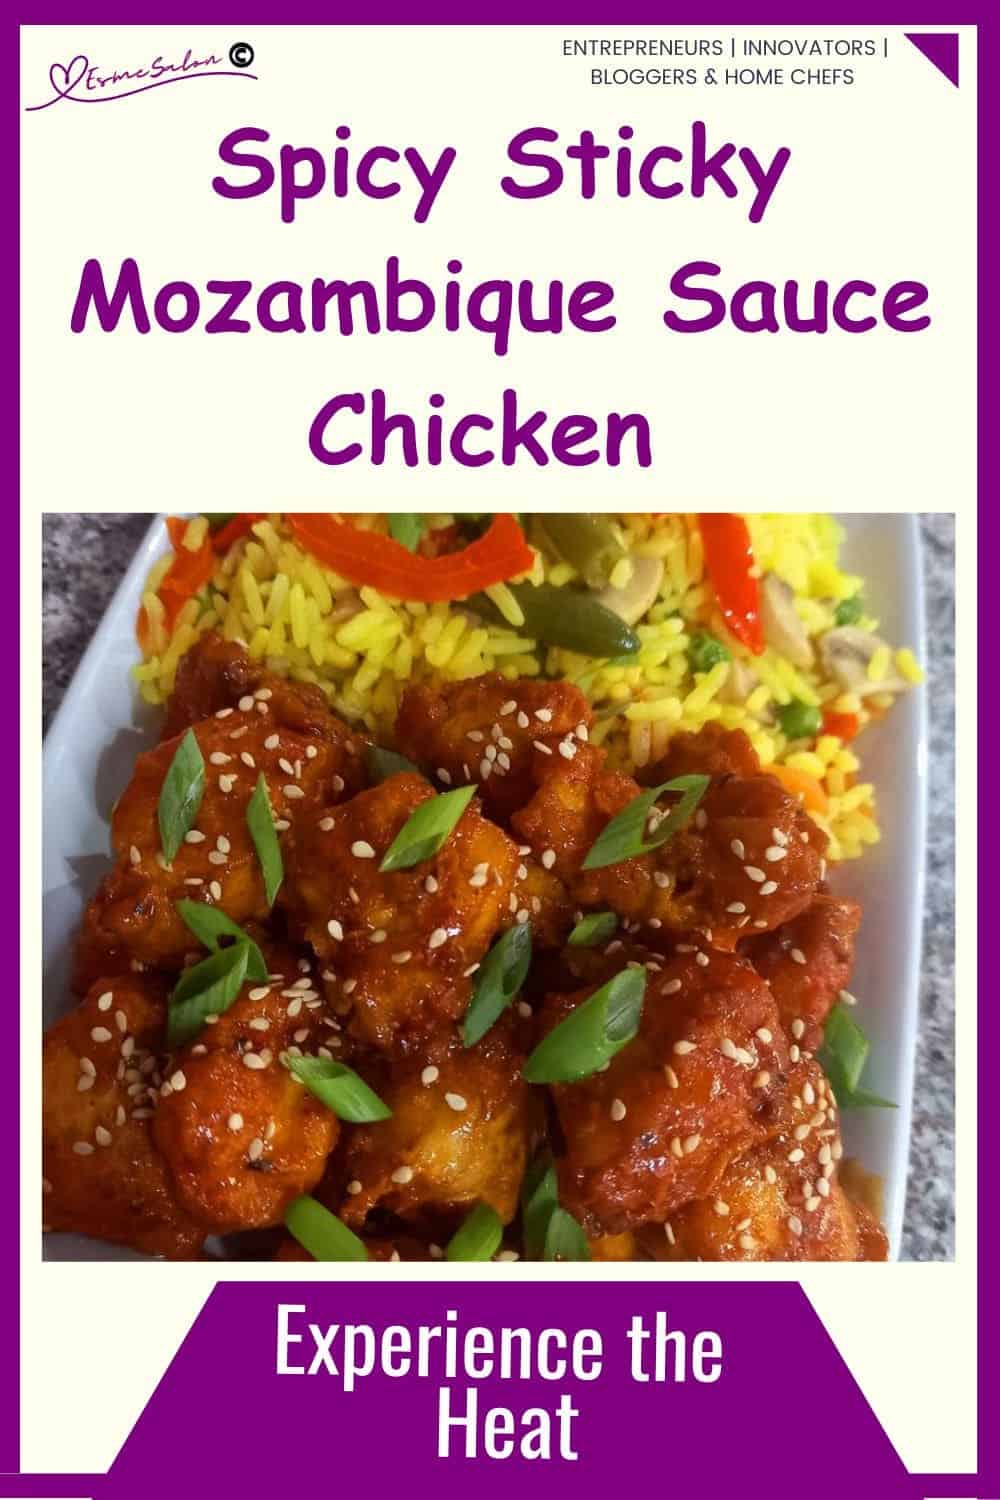 an image of Spicy Sticky Mozambique Sauce with savory rice